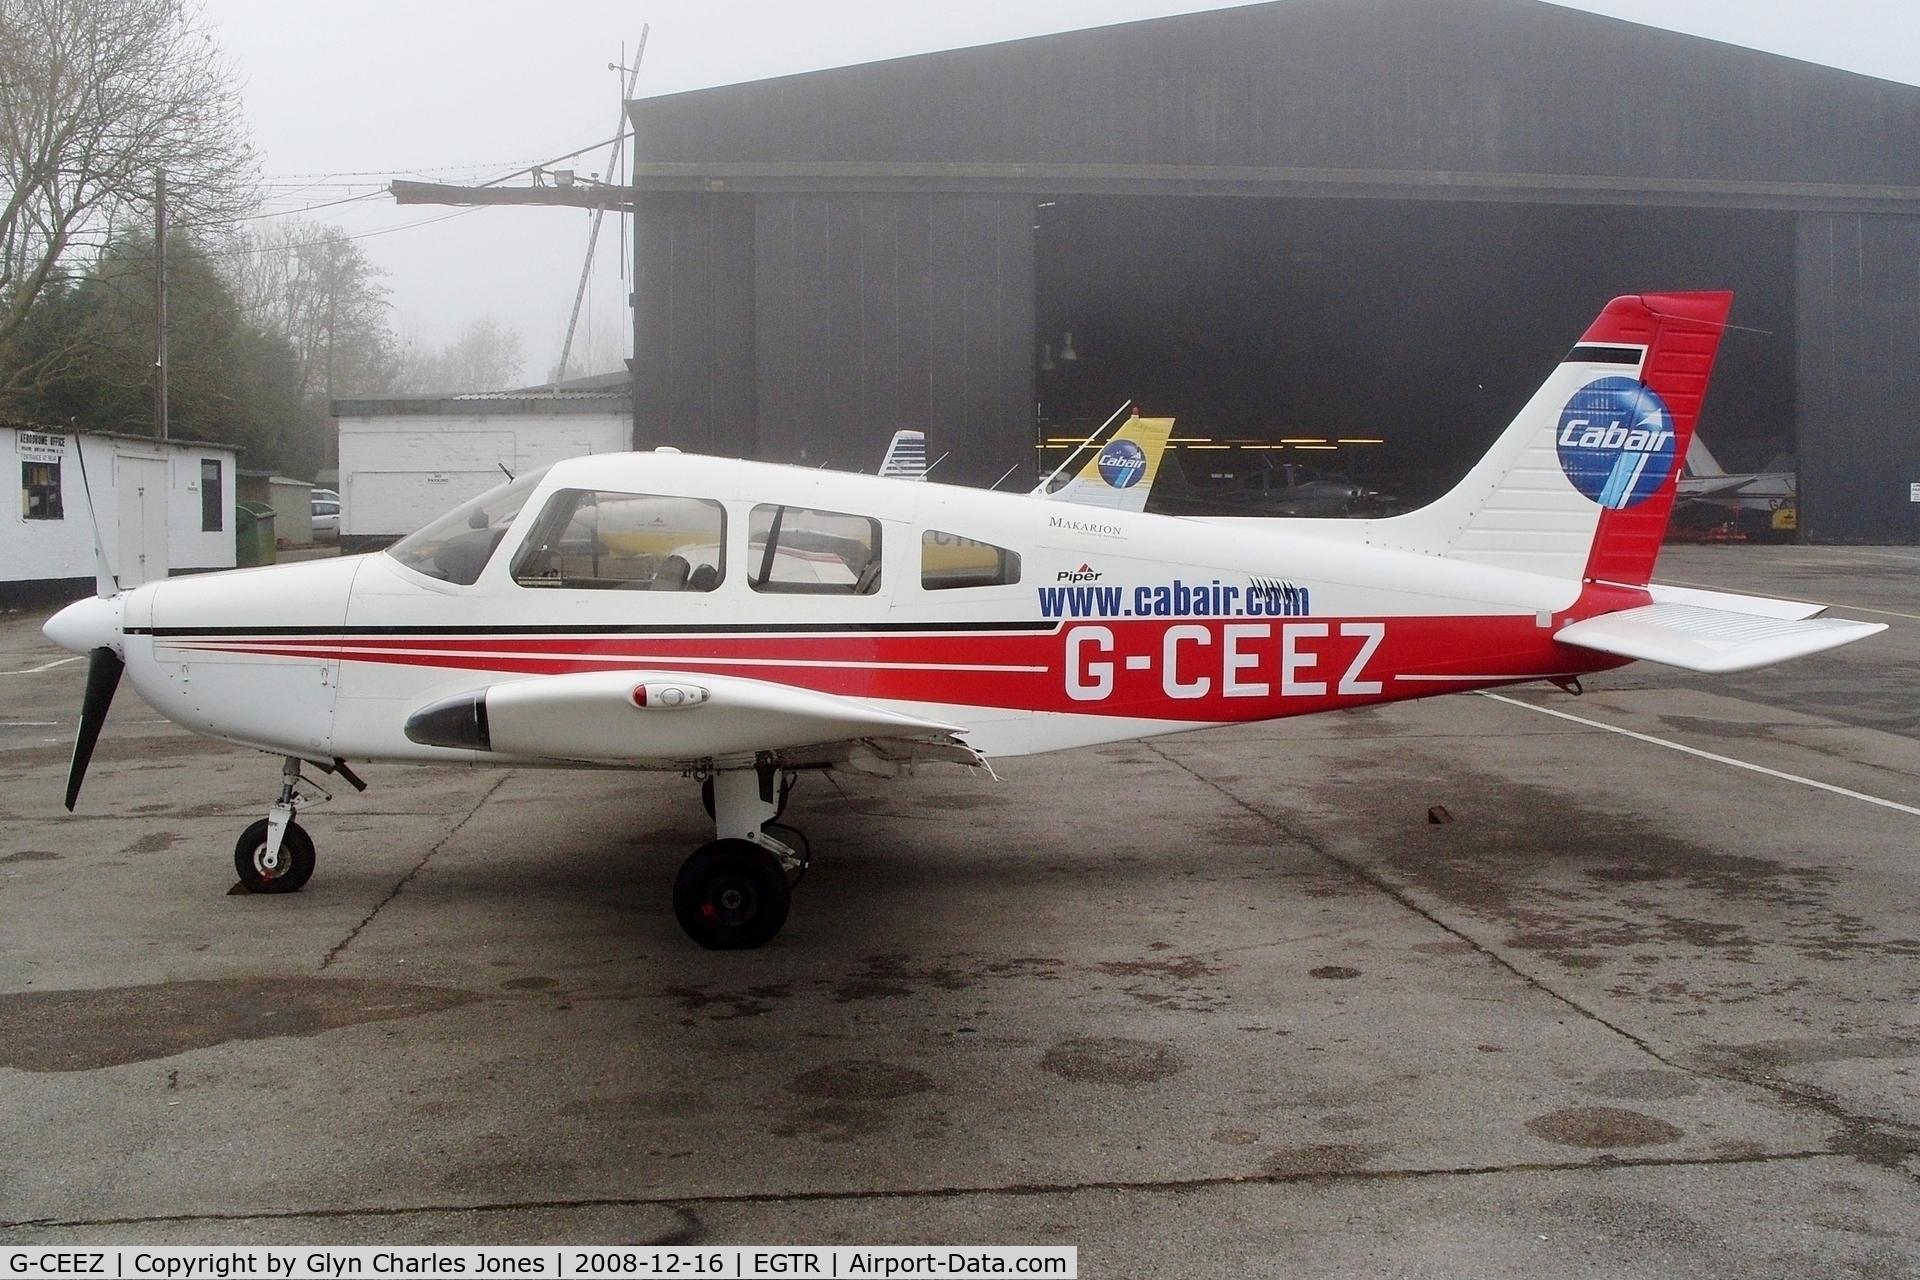 G-CEEZ, 2002 Piper PA-28-161 Warrior III C/N 2842161, Taken on a quiet cold and foggy day. With thanks to Elstree control tower who granted me authority to take photographs on the aerodrome. Previously N53513. Operated by Cabair.